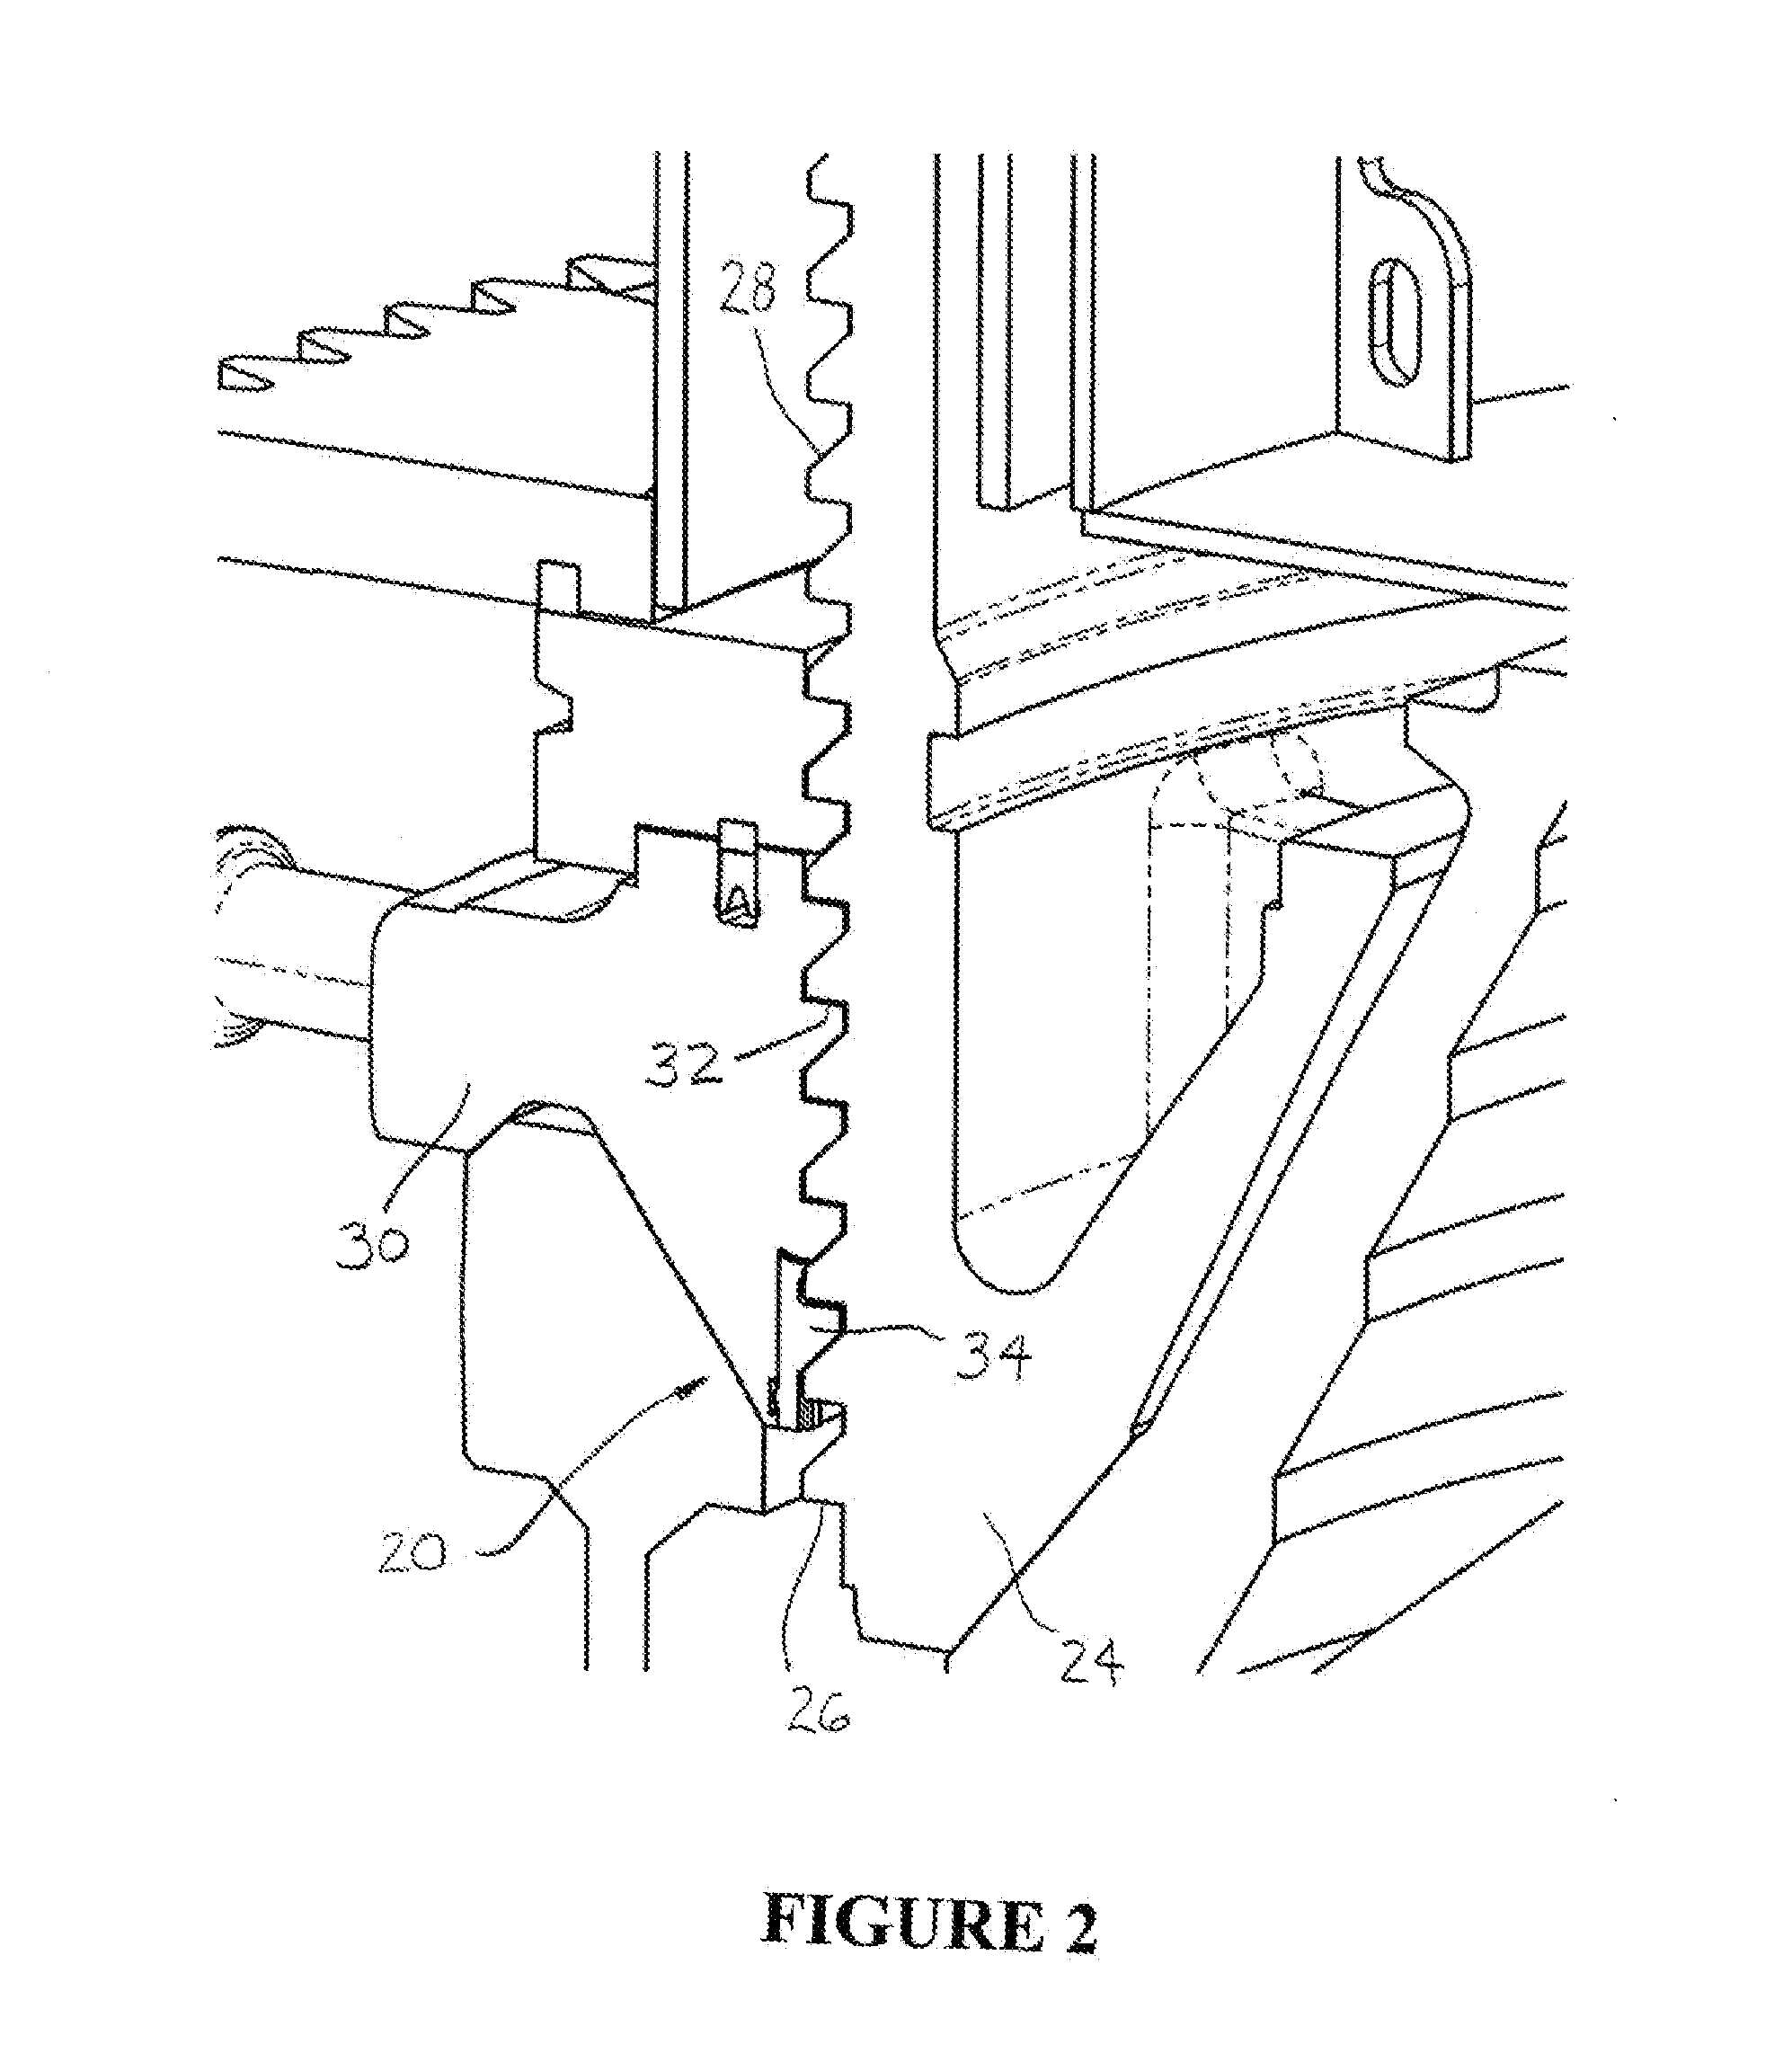 Apparatus and method for a sealing system